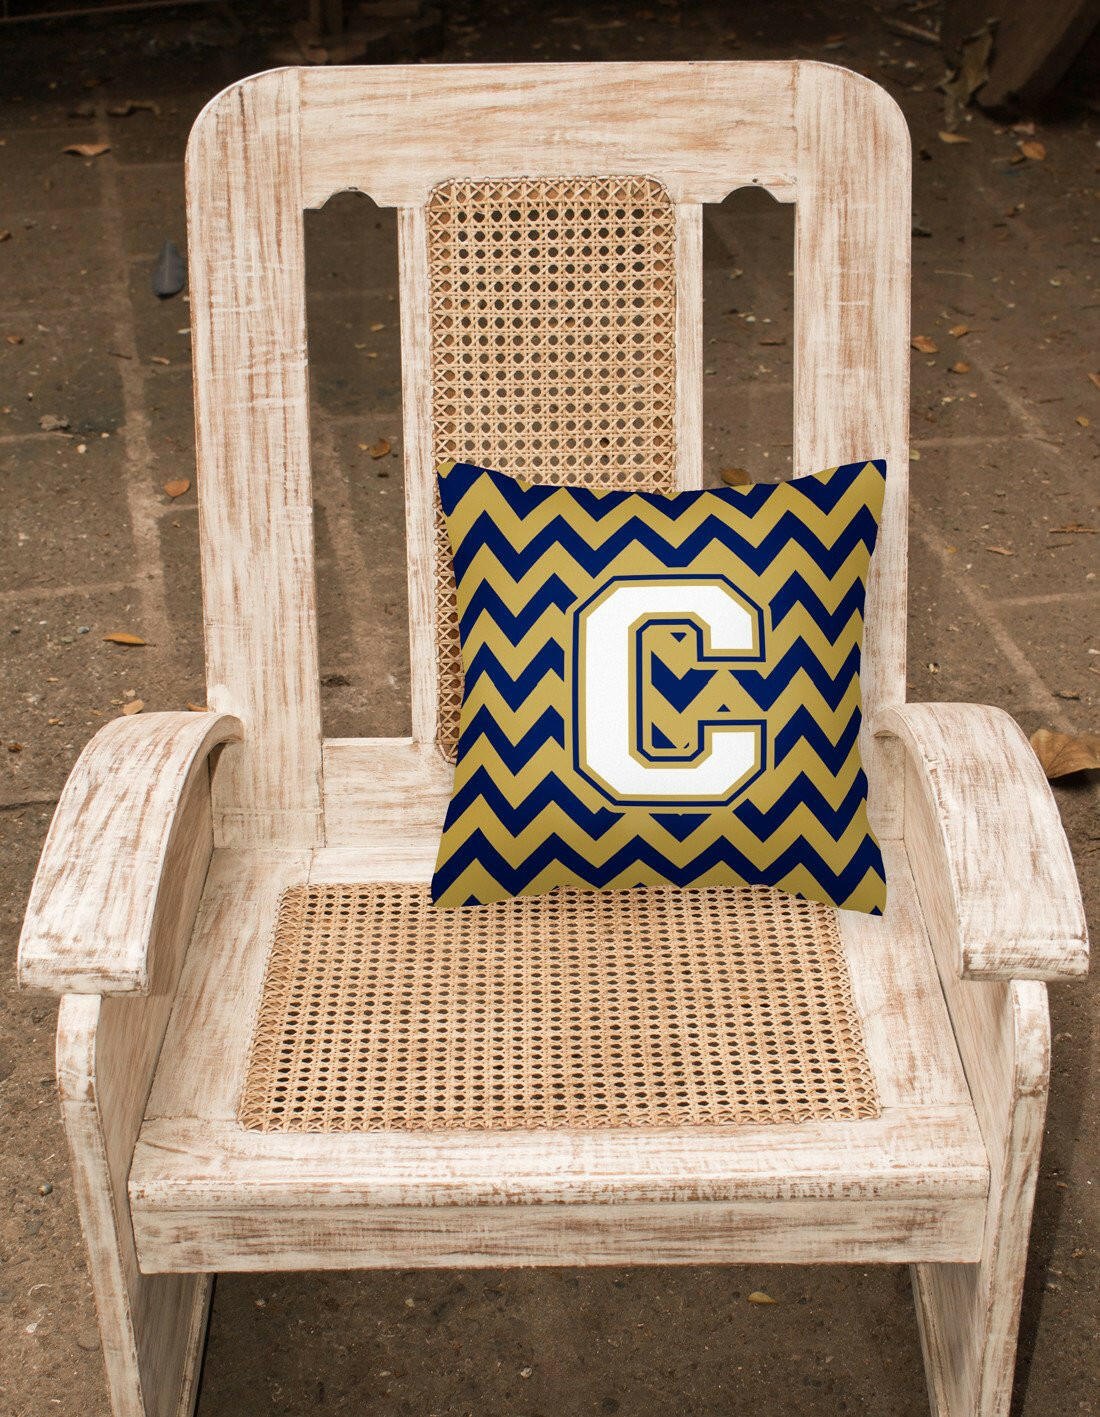 Letter C Chevron Navy Blue and Gold Fabric Decorative Pillow CJ1057-CPW1414 by Caroline's Treasures